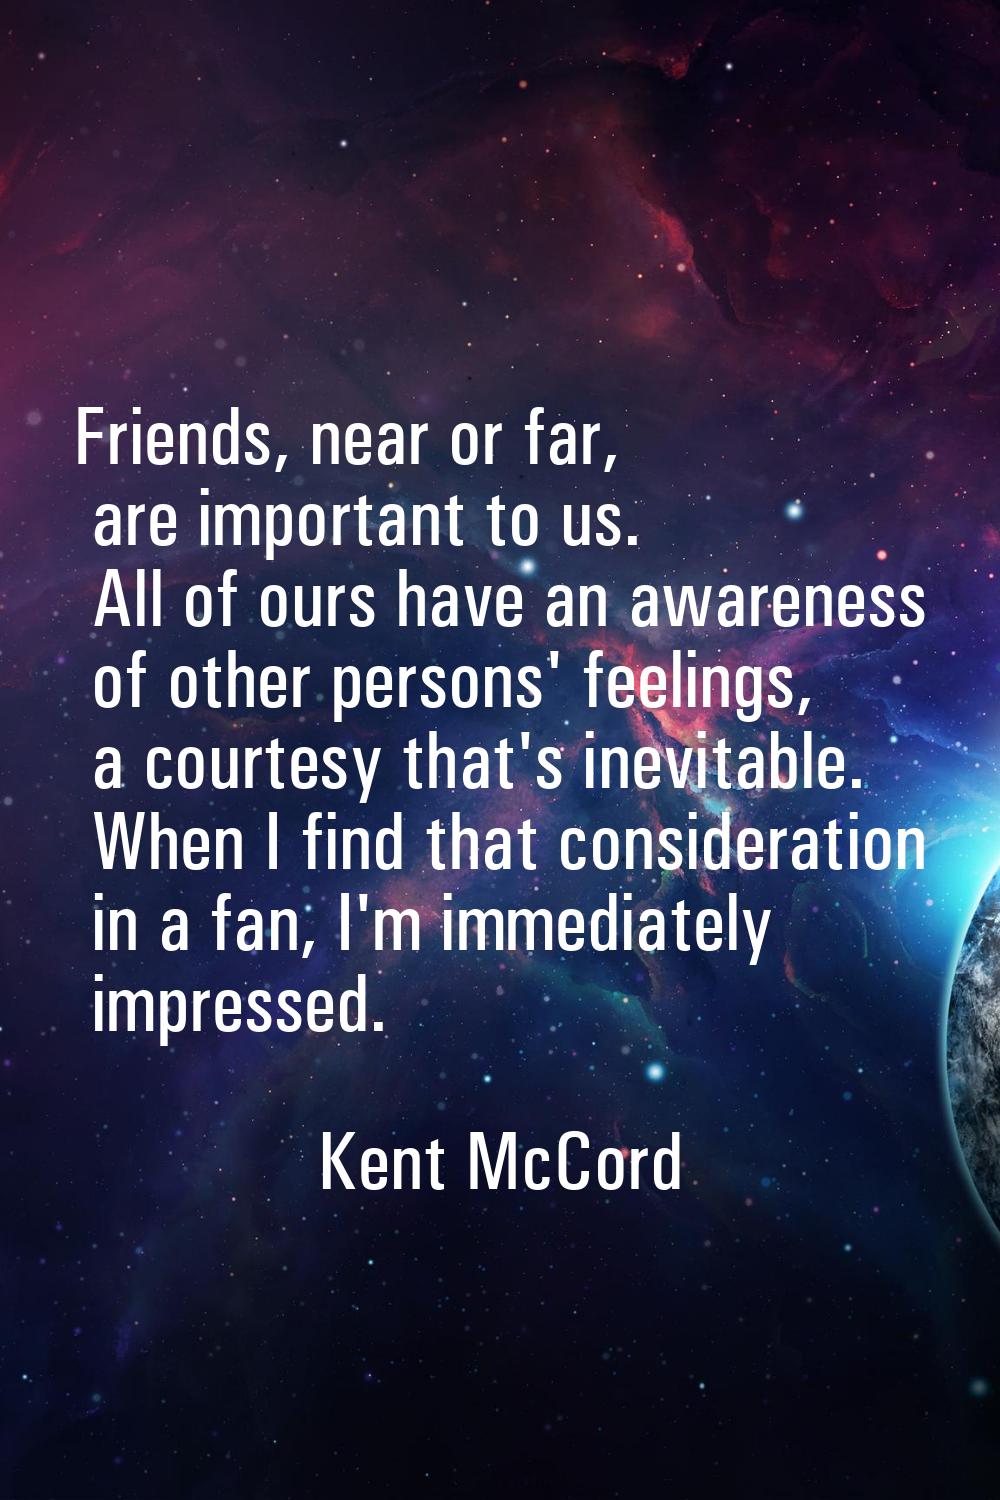 Friends, near or far, are important to us. All of ours have an awareness of other persons' feelings